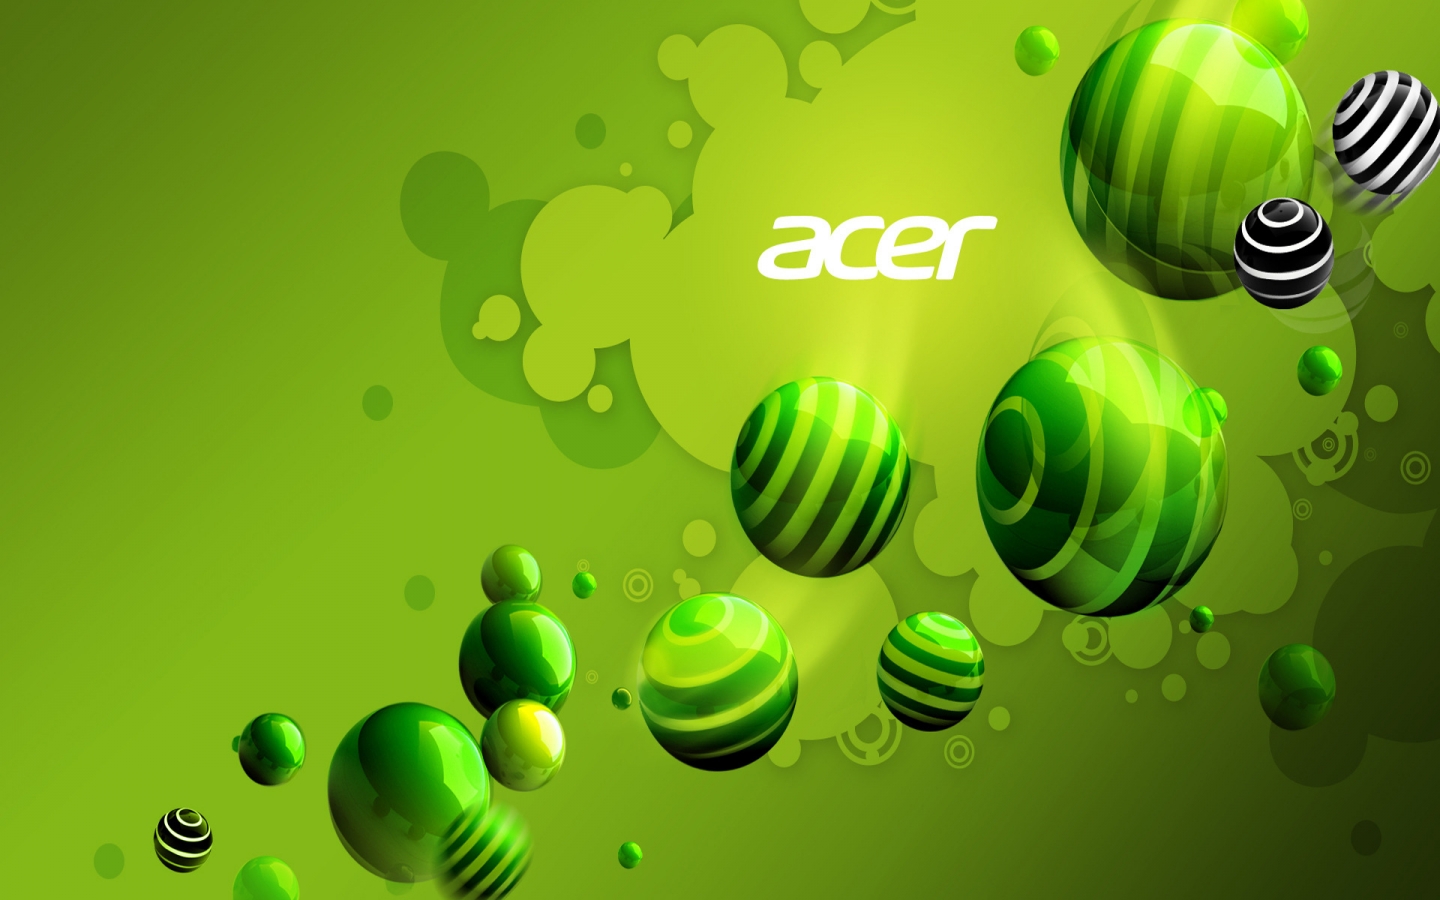 Acer Green World for 1440 x 900 widescreen resolution